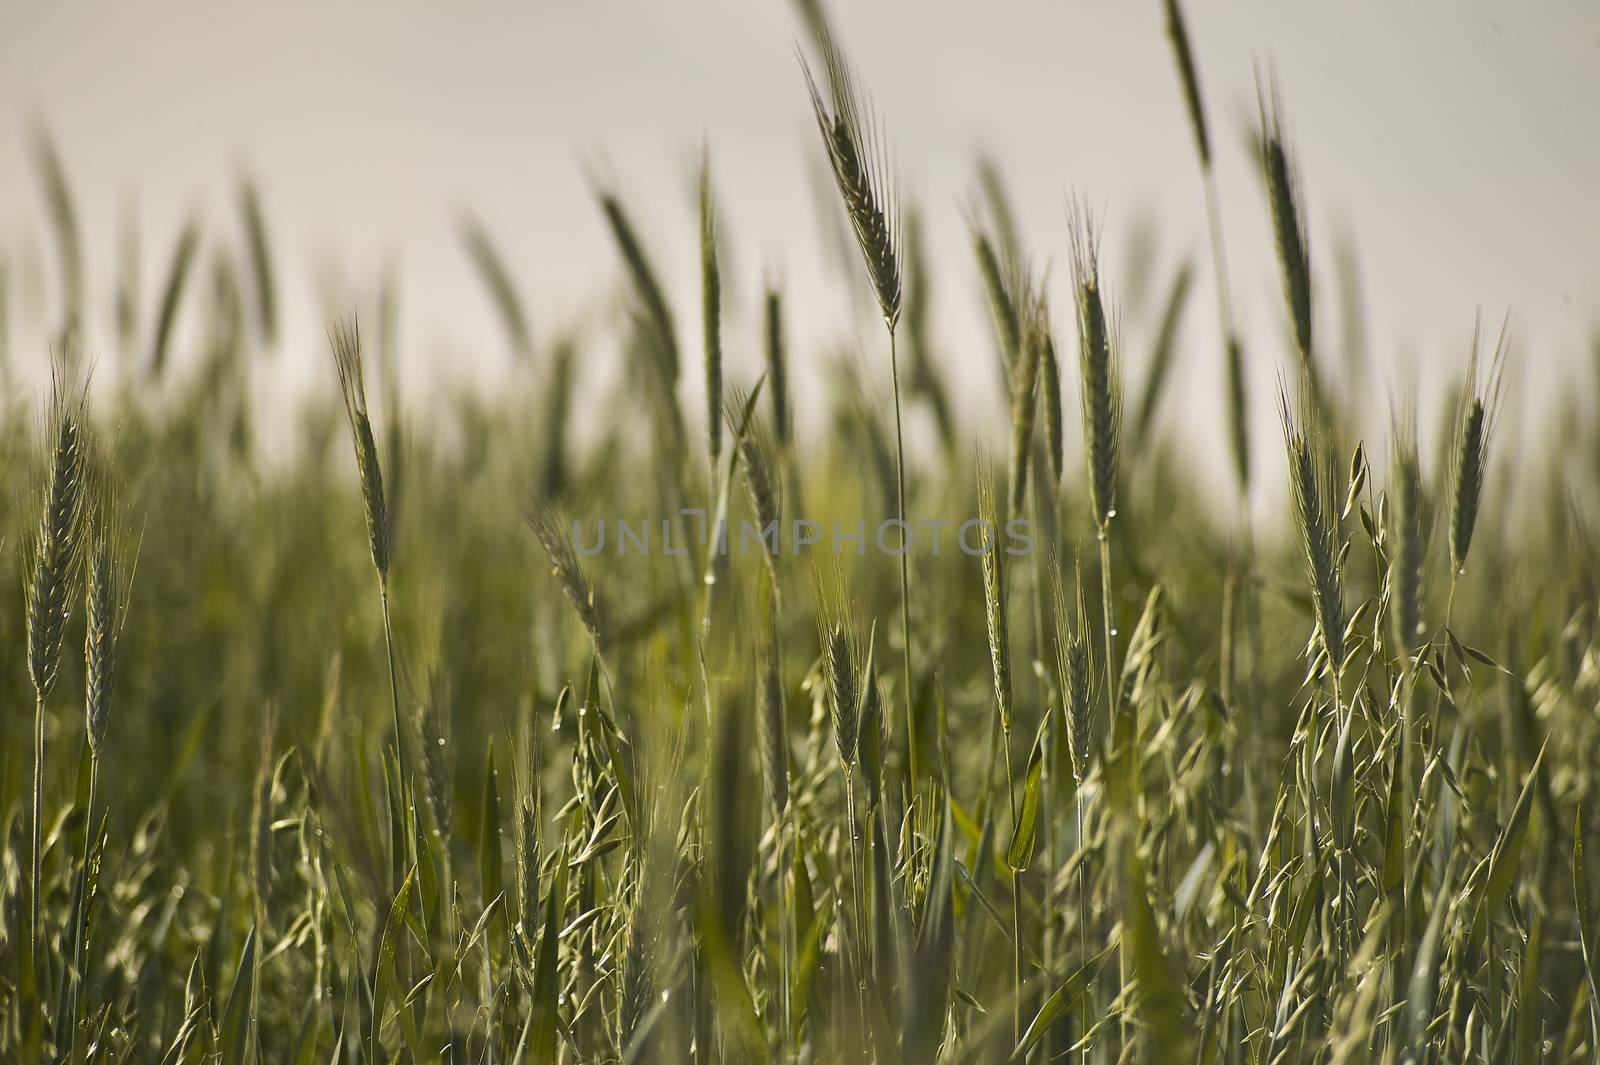 Ears of wheat in a field of cultivation, agriculture in italy.